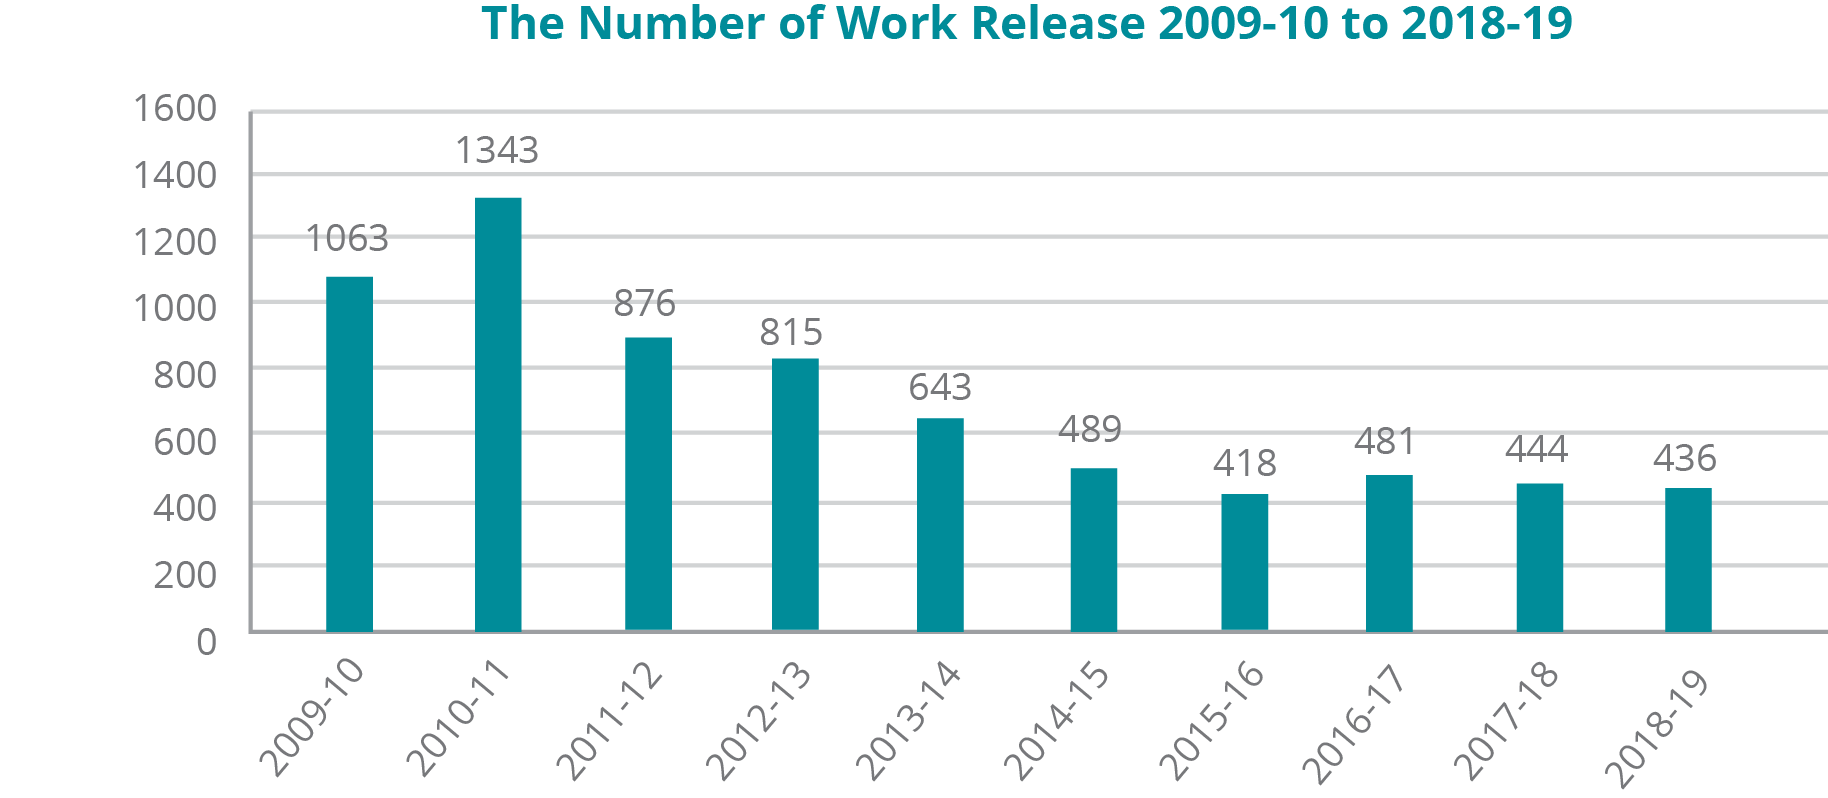 A graph depicting the number of Work Releases from fiscal years 2009-10 to 2018-19: -	In 2009-10, there were 1063. -	In 2010-11, there were 1343. -	In 2011-12, there were 876. -	In 2012-13, there were 815. -	In 2013-14, there were 643. -	In 2014-15, there were 489. -	In 2015-16, there were 418. -	In 2016-17, there were 481. -	In 2017-18, there were 444. -	In 2018-19, there were 436.